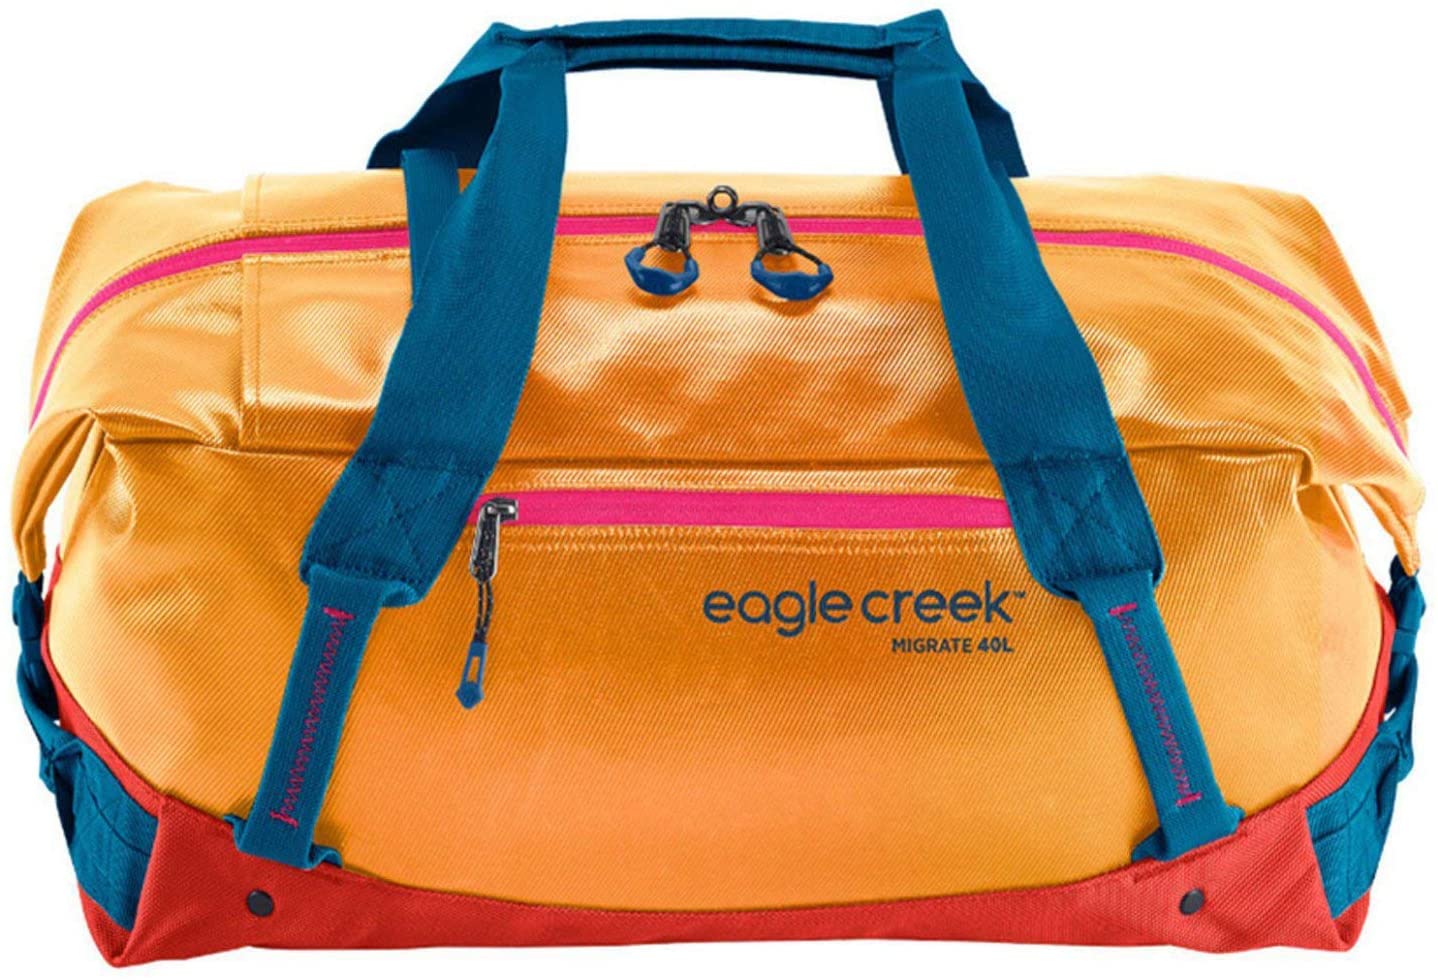 Eagle Creek Migrate Duffel 40L in Sahara Yellow color from the front